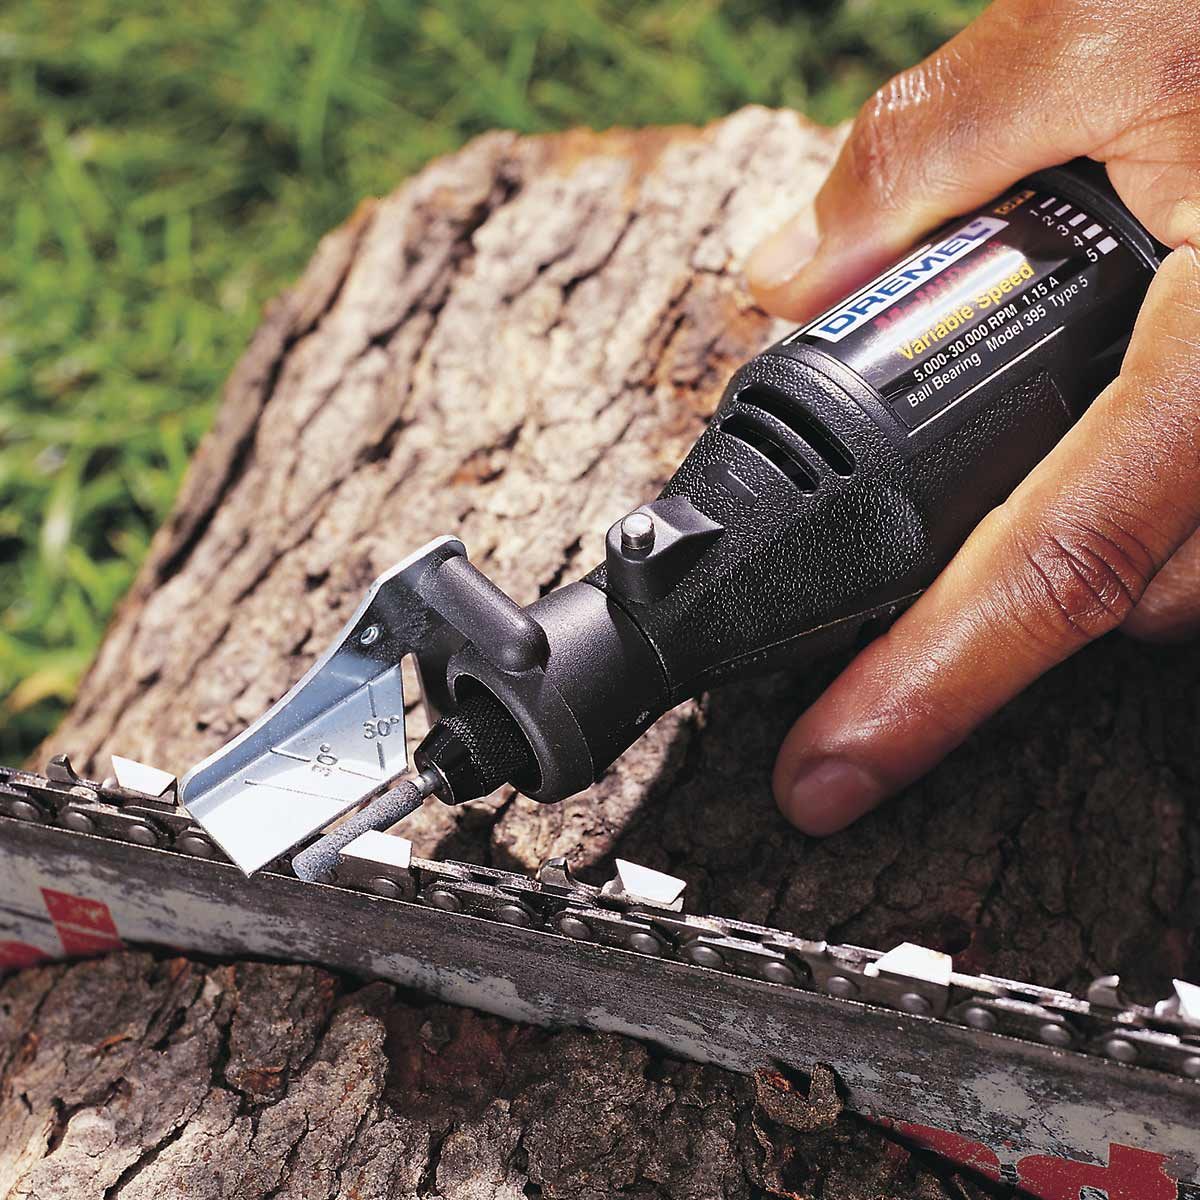 Rotary Tool Uses: The sky's the limit!